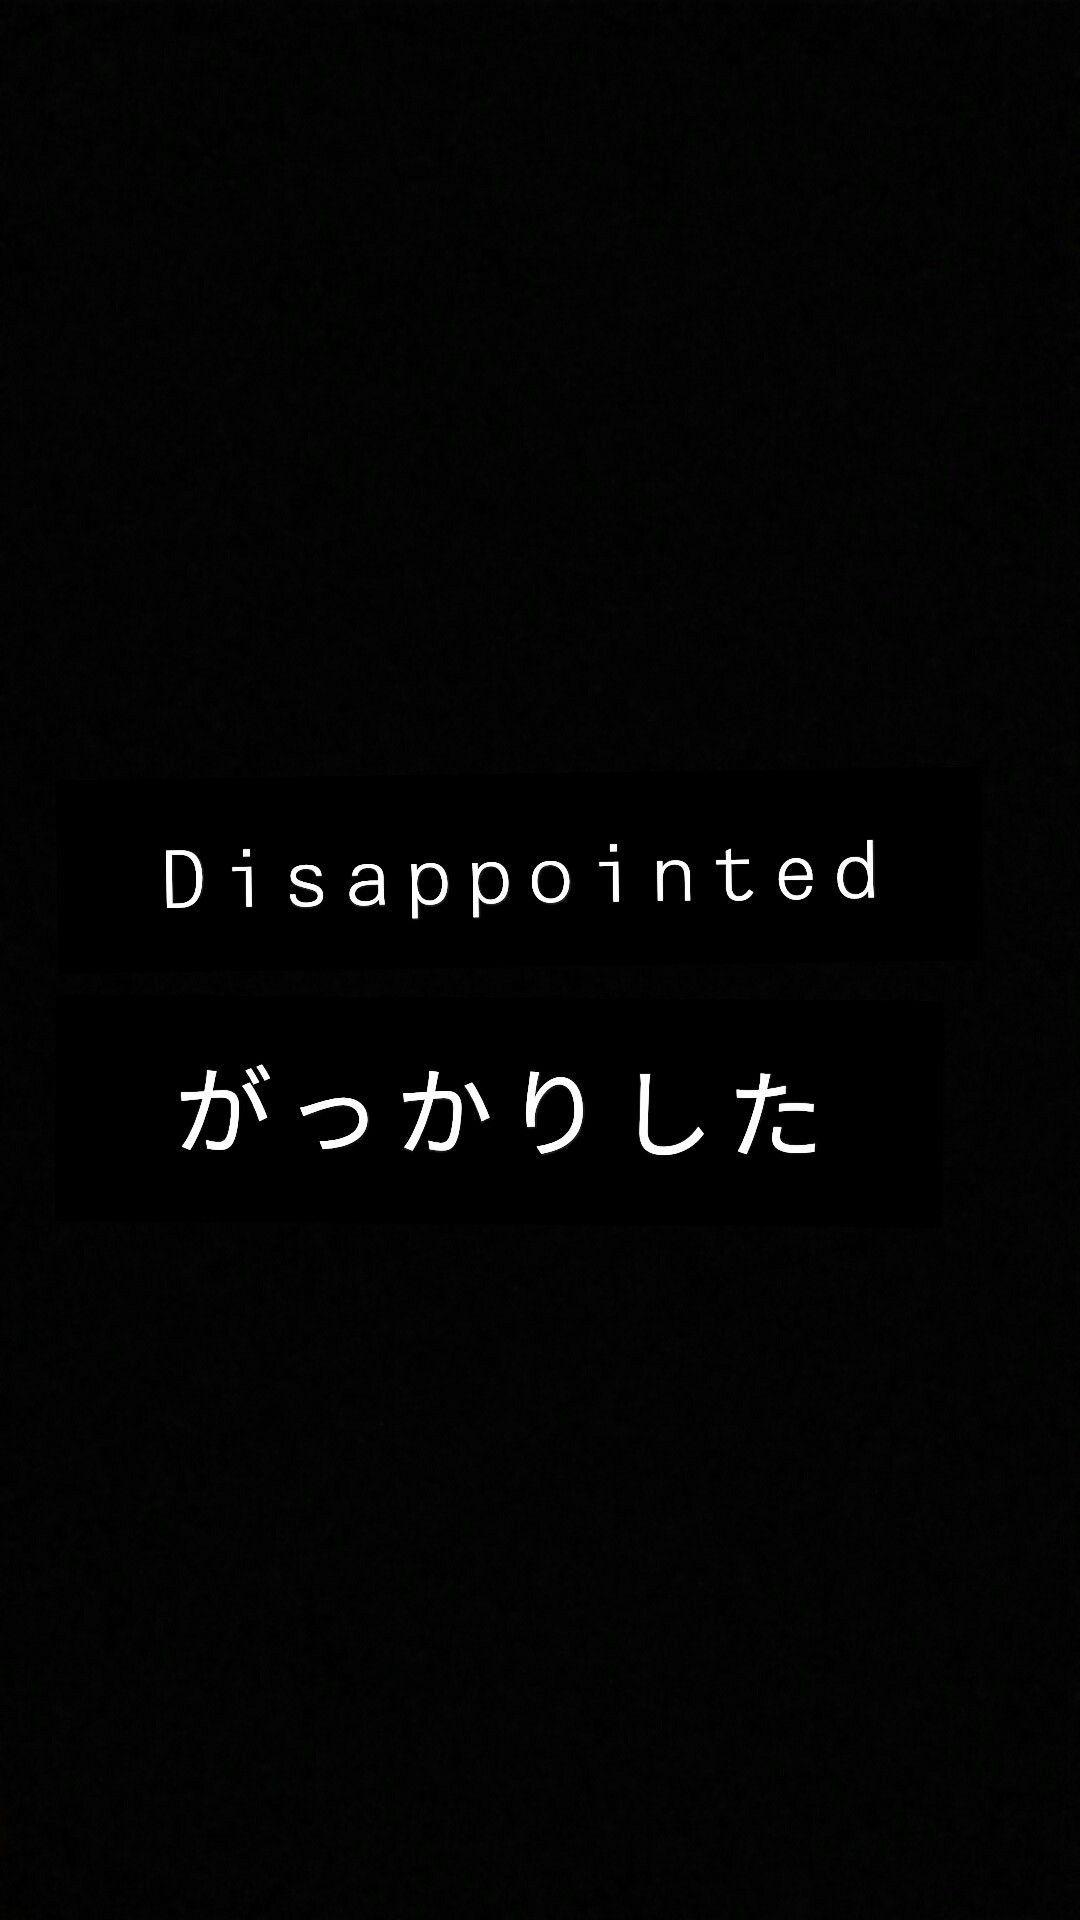 Disappointed Wallpapers - Top Free Disappointed Backgrounds ...